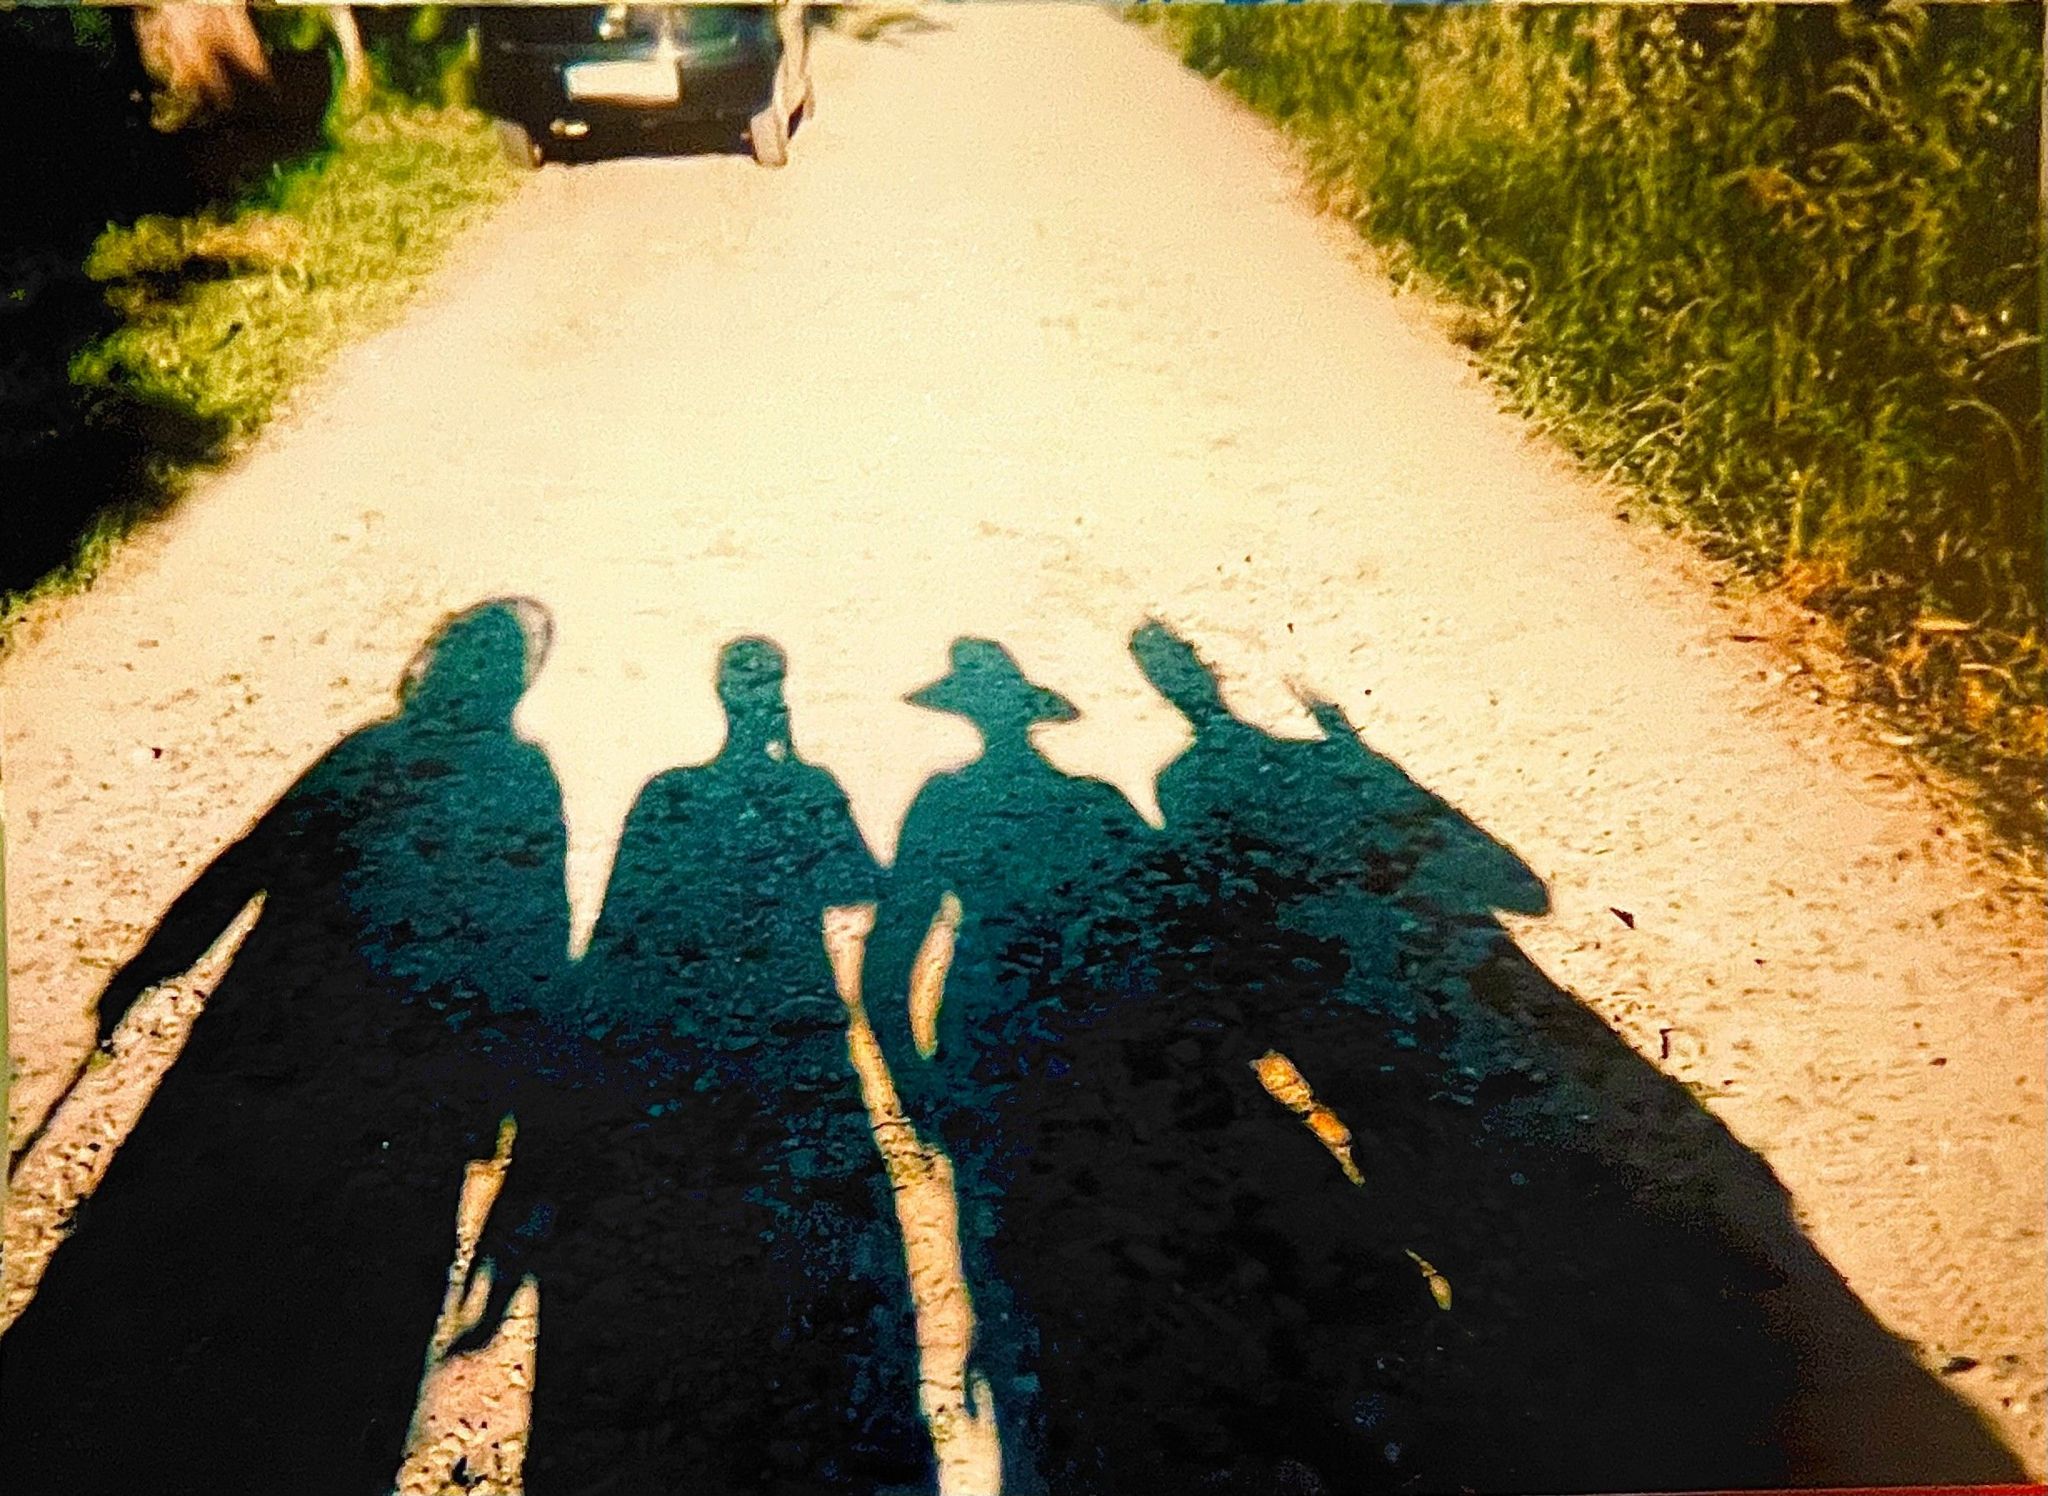 Shadows of four people on a path on the Camino de Santiago